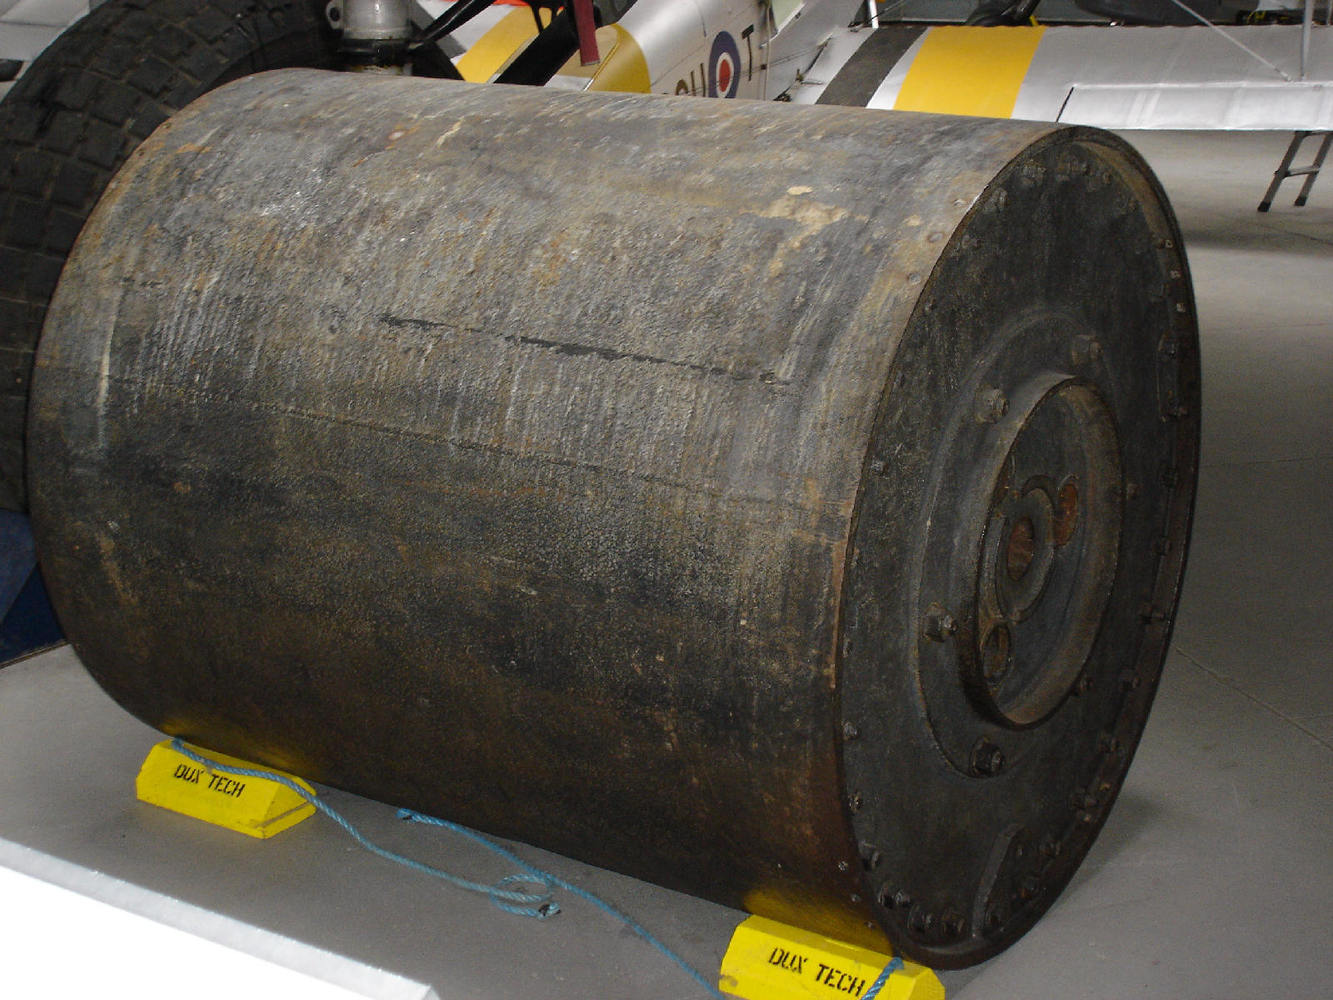 A real bouncing bomb at Duxford Imperial War Museum. Photographed by Martin Richards Feb 2005.